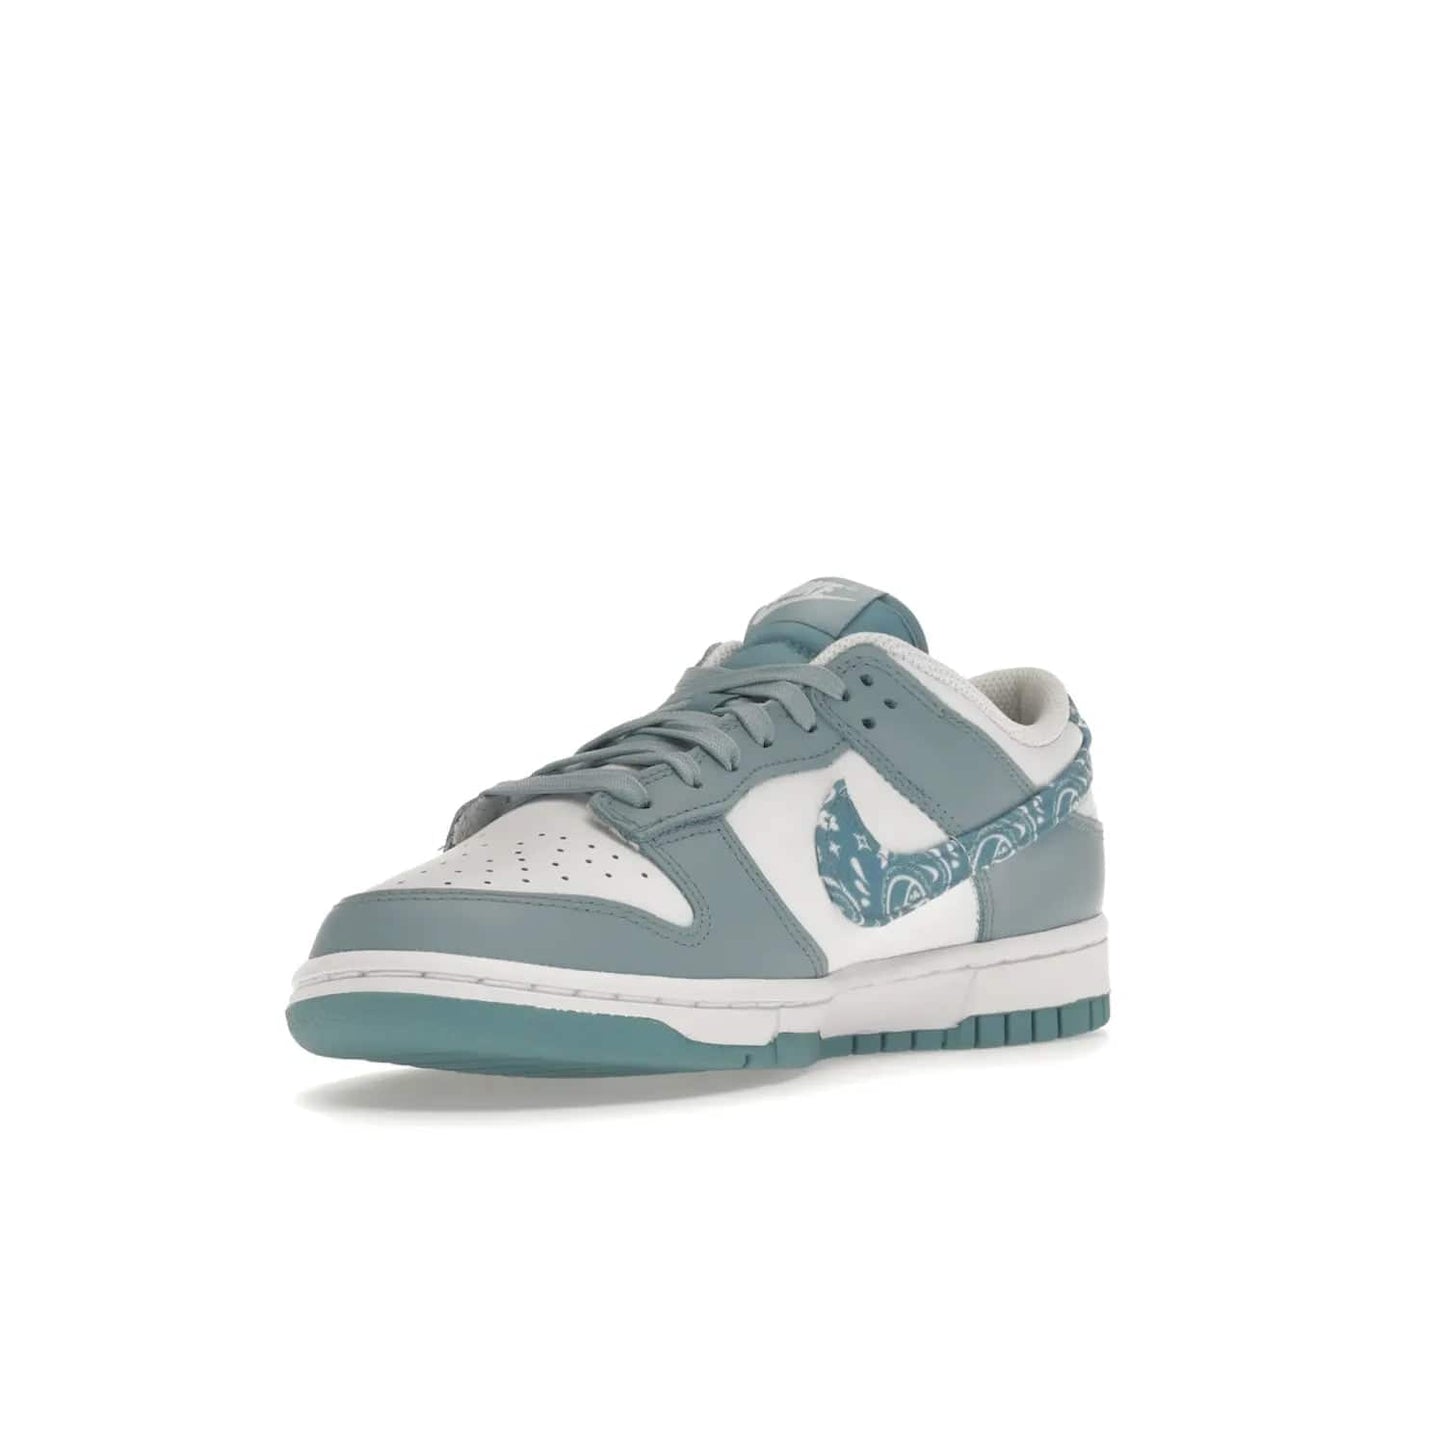 Nike Dunk Low Essential Paisley Pack Worn Blue (Women's) - Image 14 - Only at www.BallersClubKickz.com - Get the Nike Dunk Low Essential Paisley Pack Worn Blue (Women's) for style and comfort. White leather construction, light blue leather overlays, canvas Swooshes and matching heel tabs offer a rich blue hue. Finished by a white and light blue sole, this classic Nike Dunk is the perfect addition to any wardrobe. Released in March 2022.